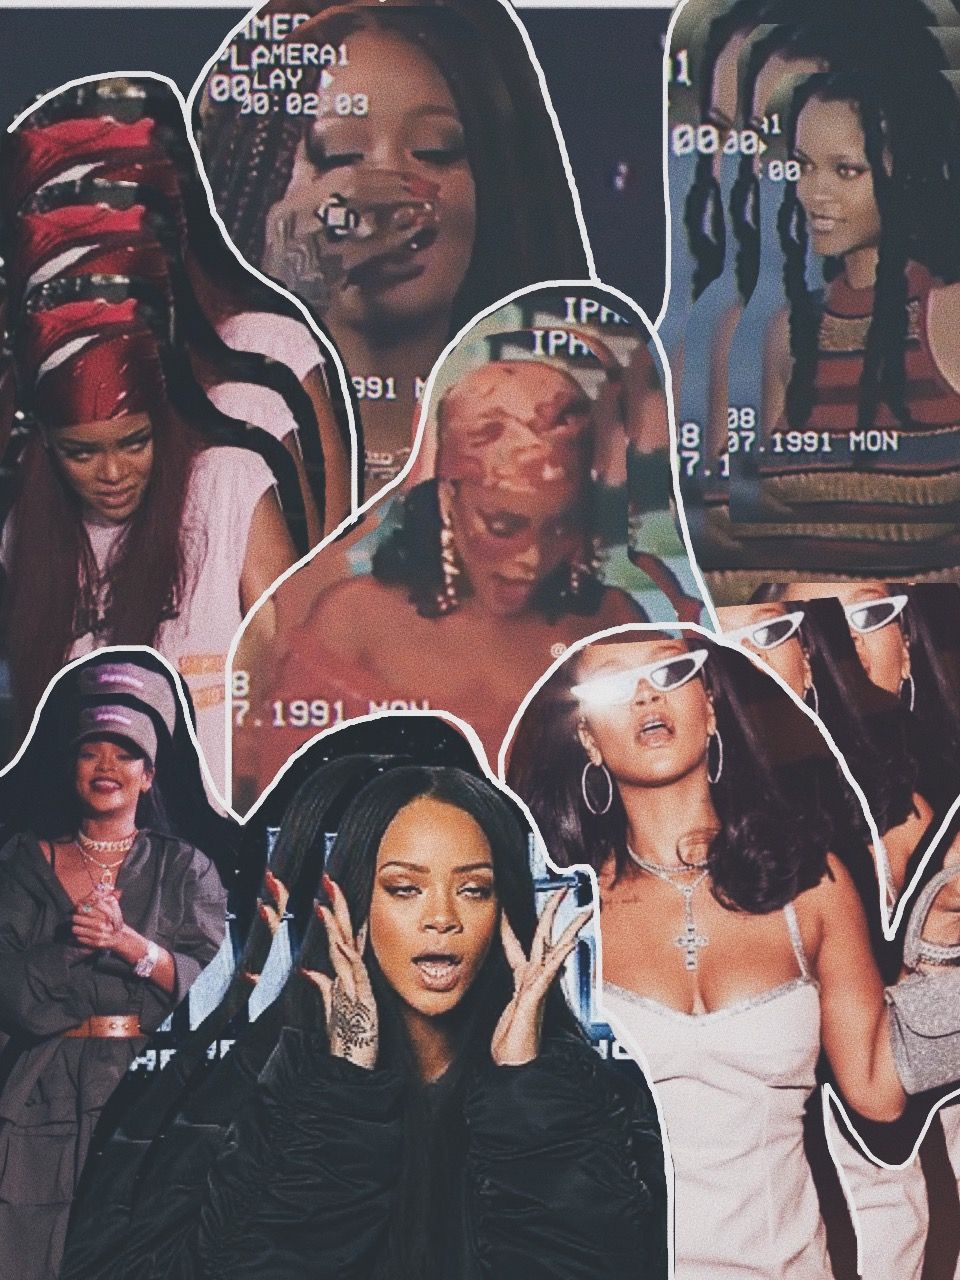 A collage of pictures with different people in them - Rihanna